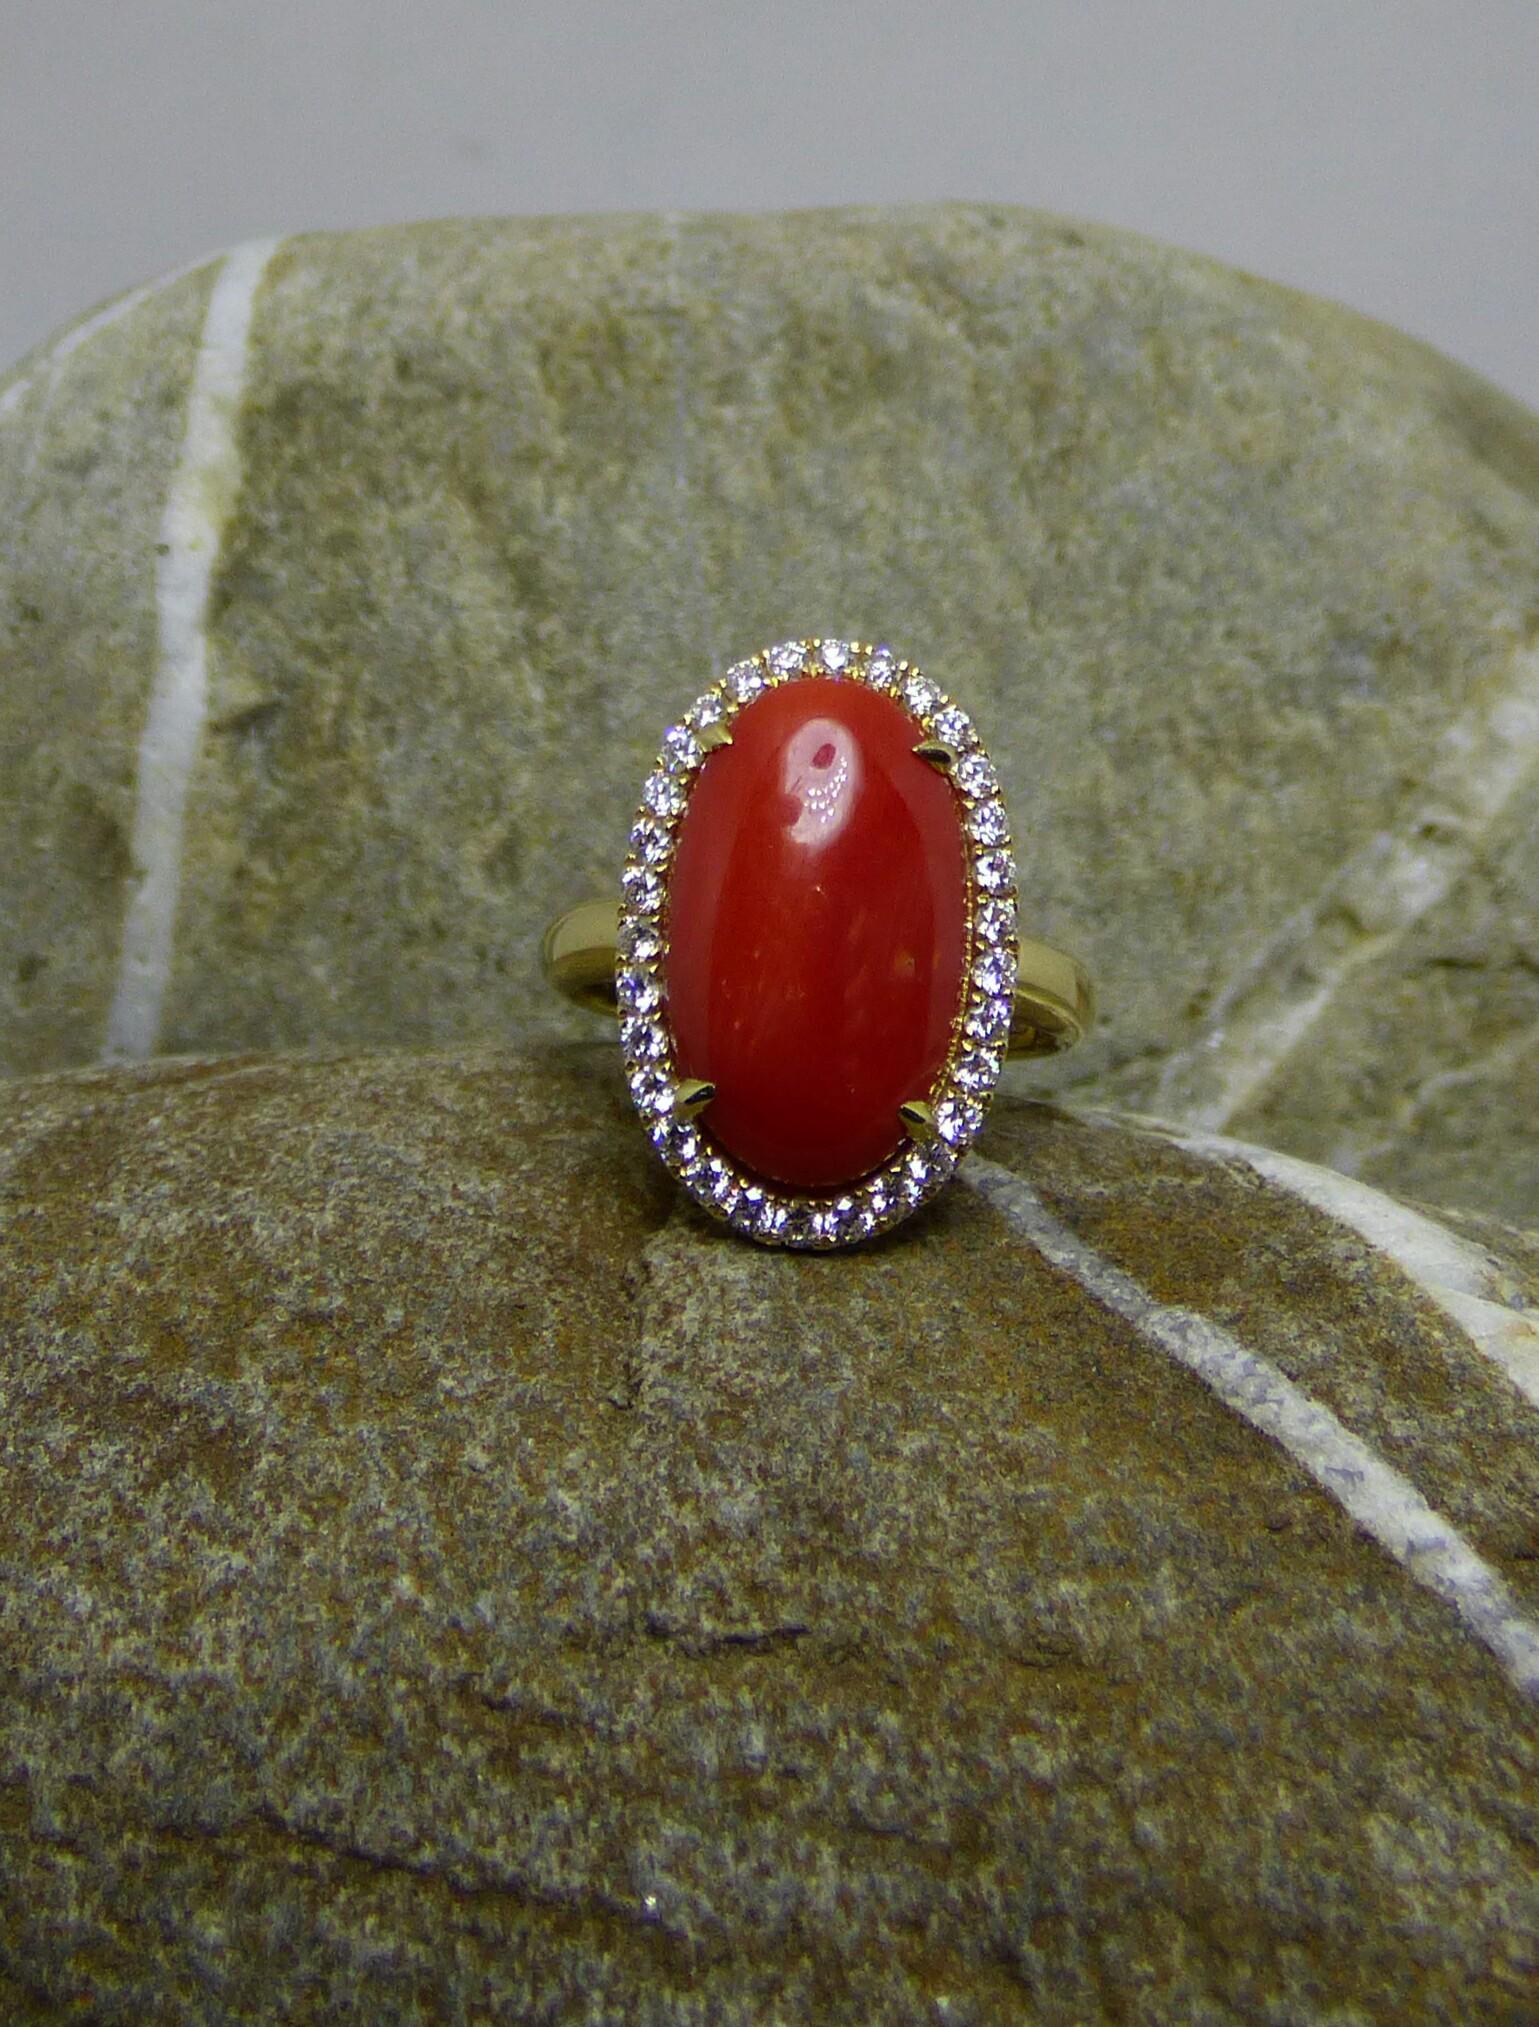 A large oval natural red coral cabochon (5.57ct.) is surrounded by thirty Diamonds with a total weight of .50ct. The ring is handmade in 14K yellow gold ring. It is hallmarked at the Dublin Assay office.  This beautiful ring truly fills the finger!